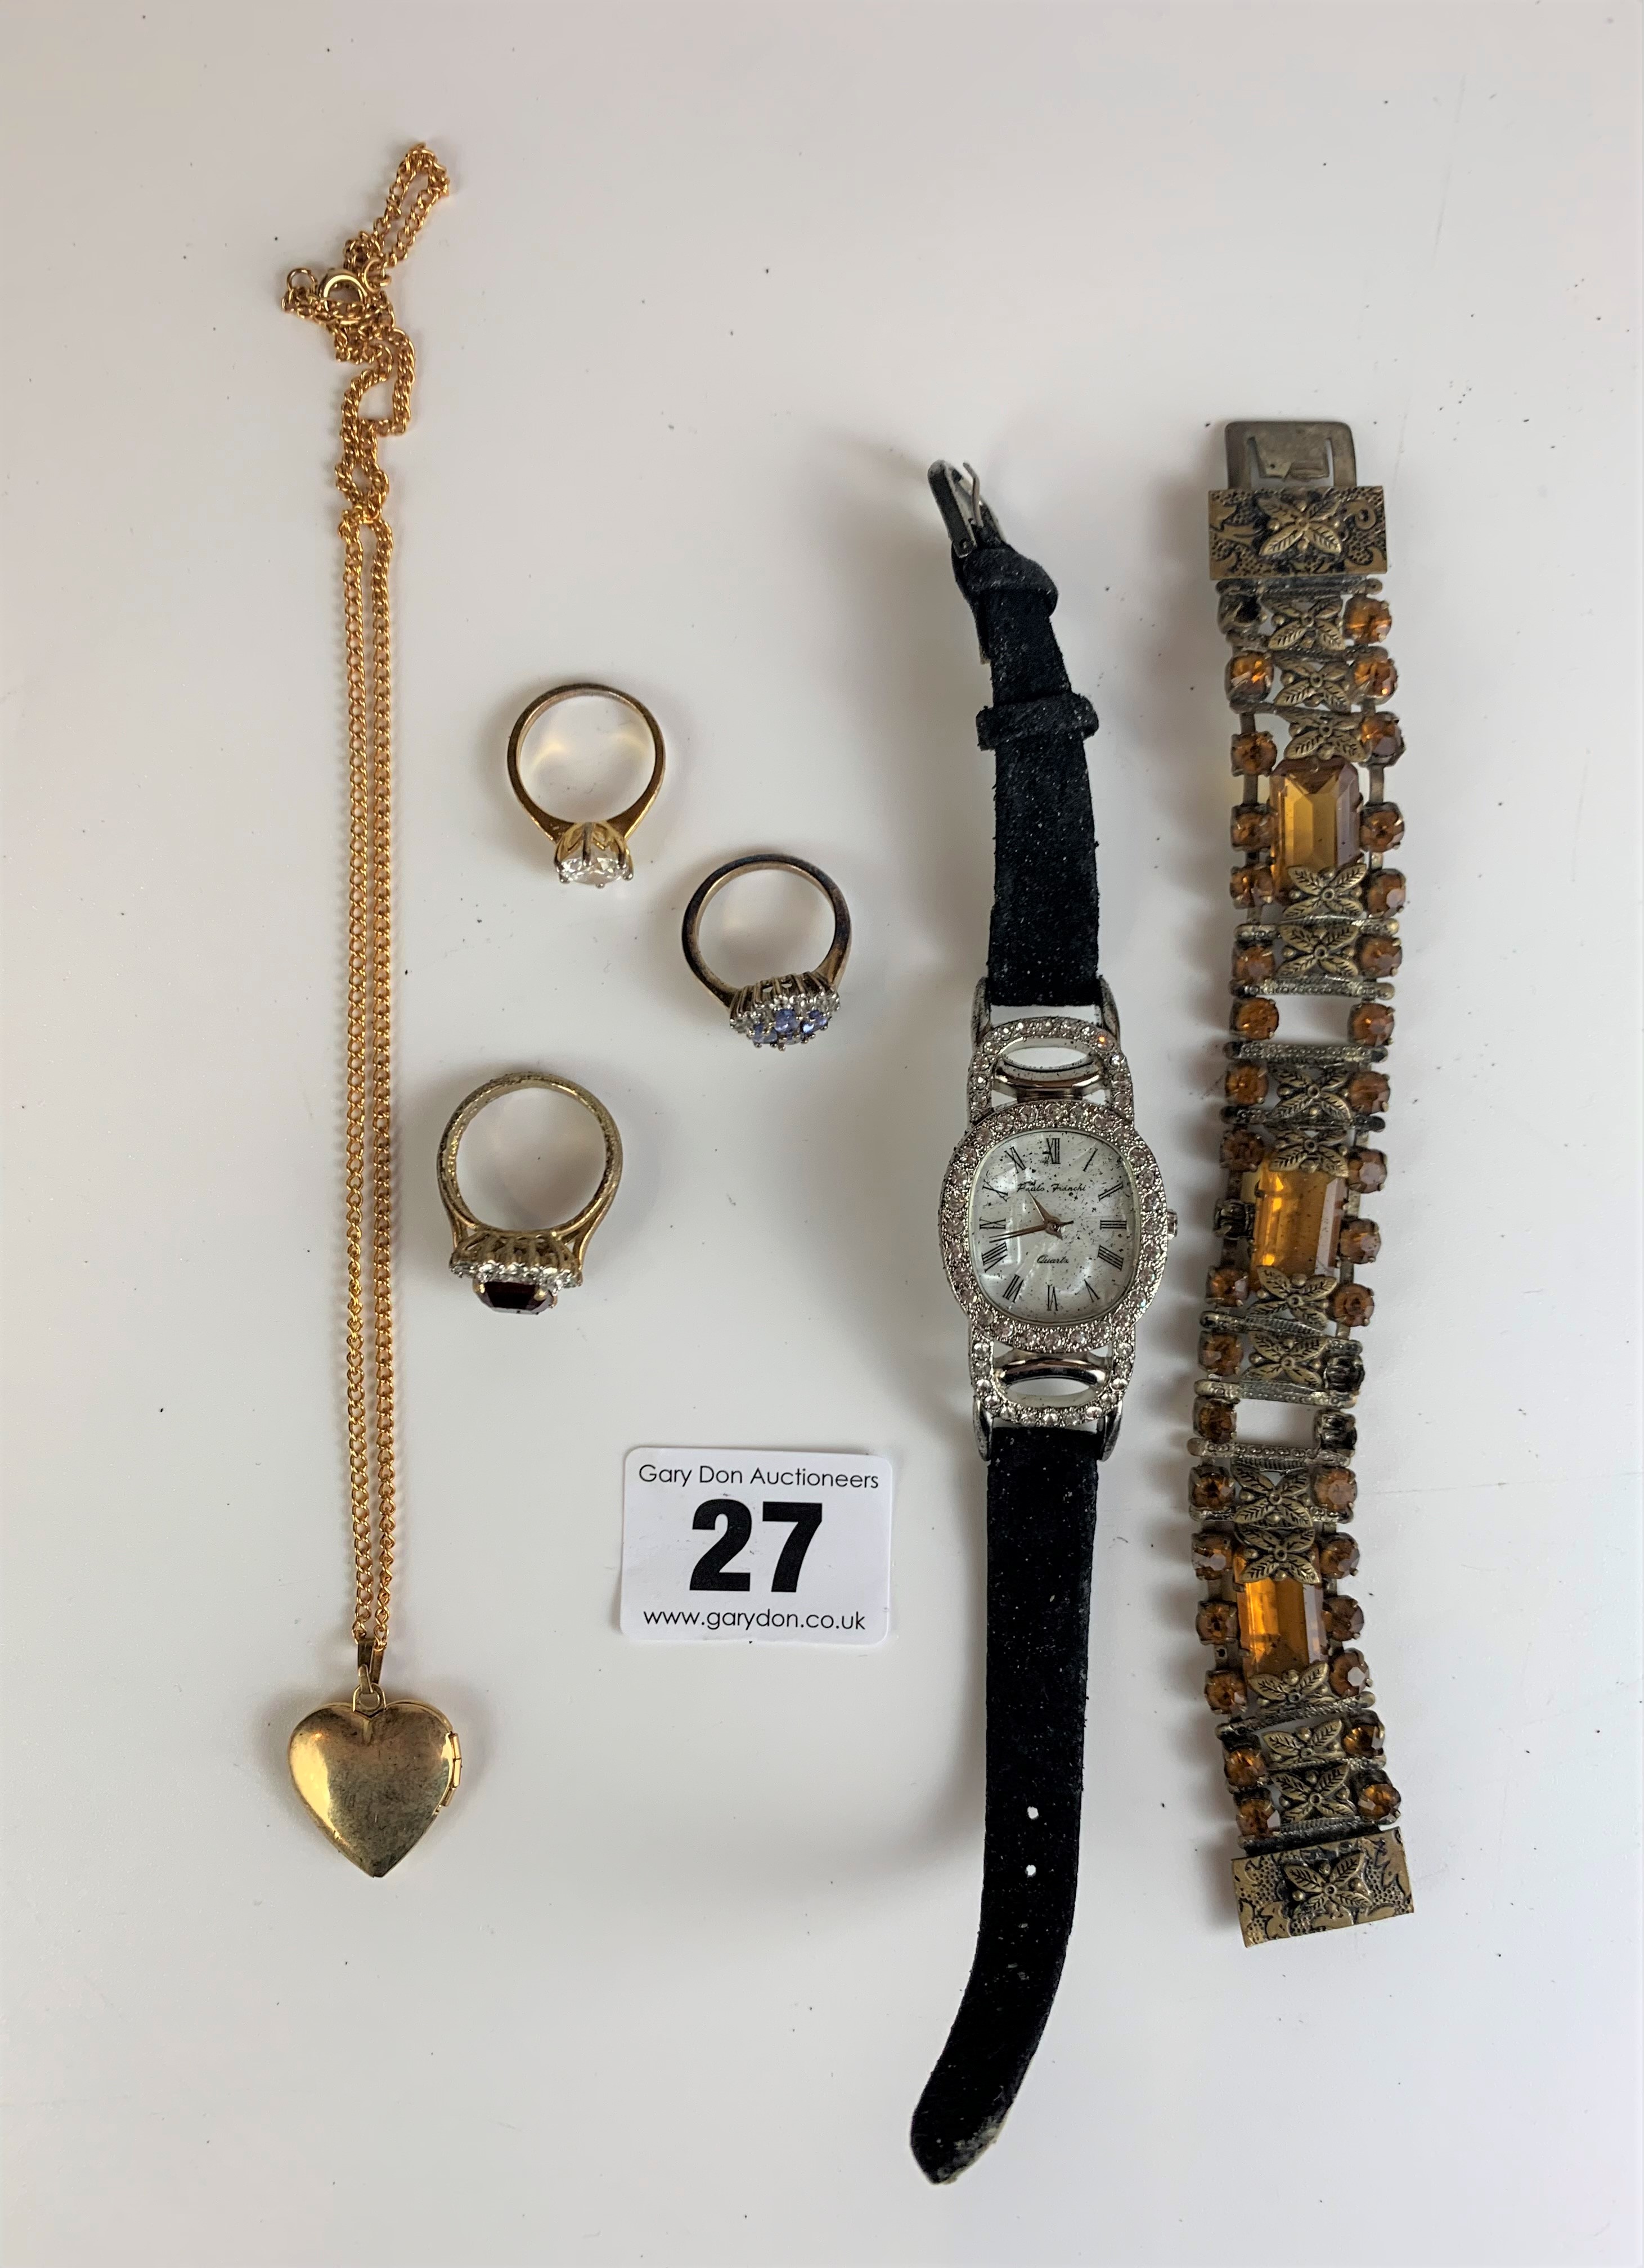 Dress jewellery – watch, bracelet, necklace with locket and 3 rings